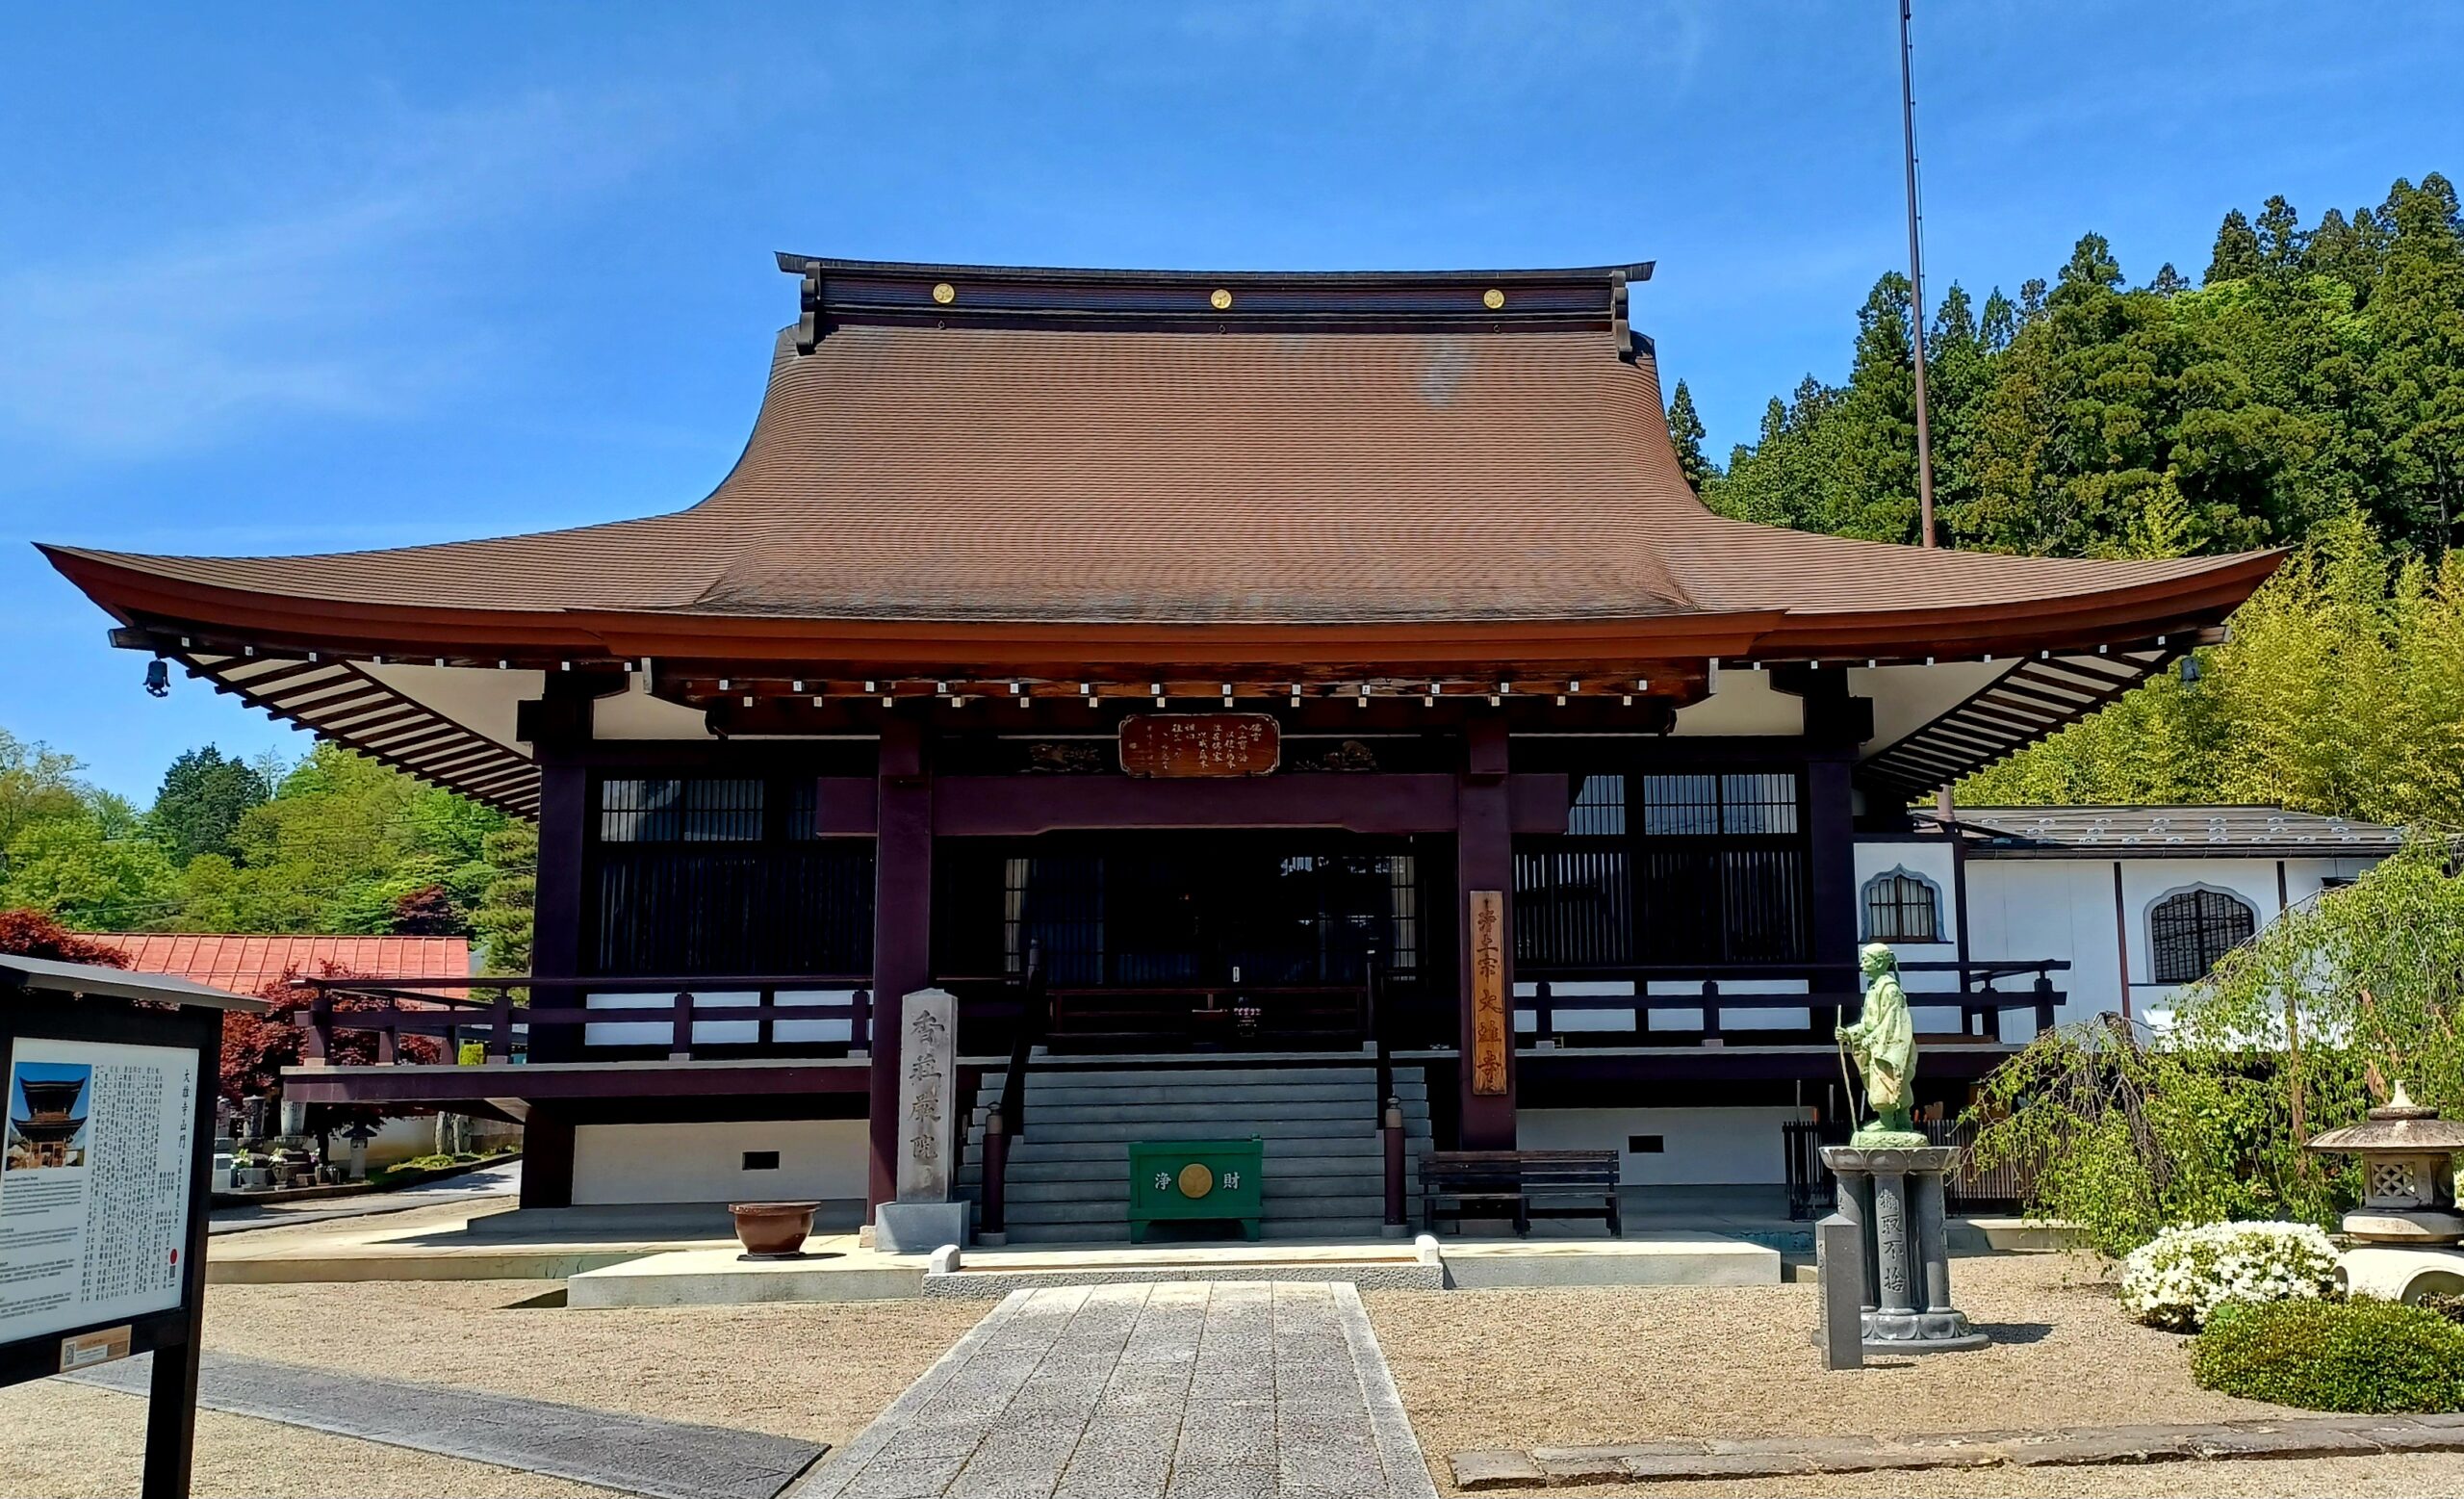 A dark brown Buddhist temple building with a red roof.